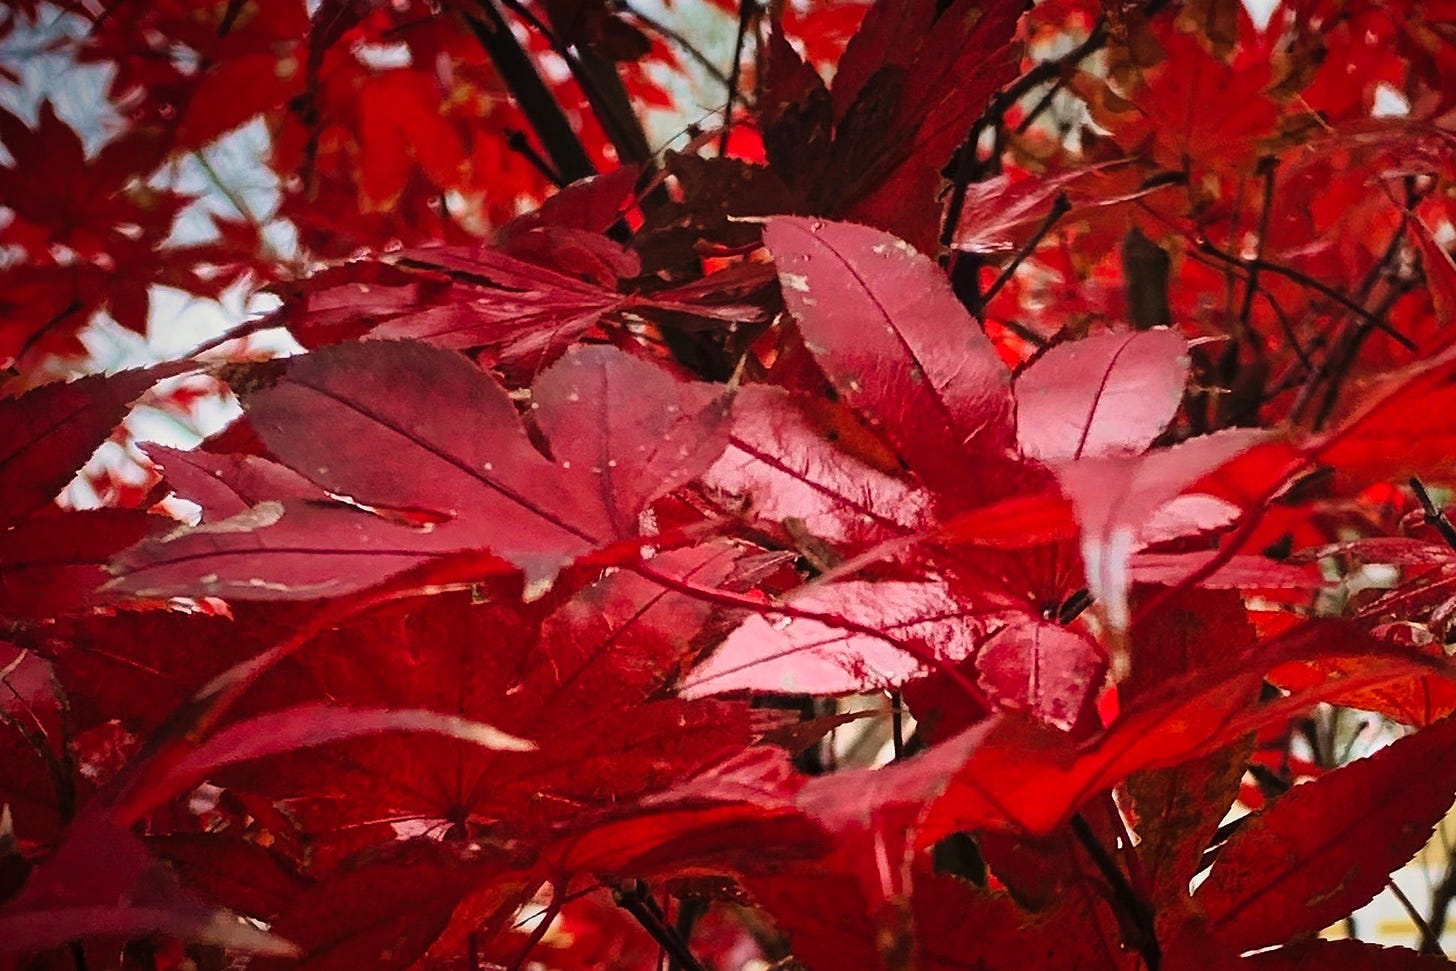  Closeup of Red Japanese Mapel leaves